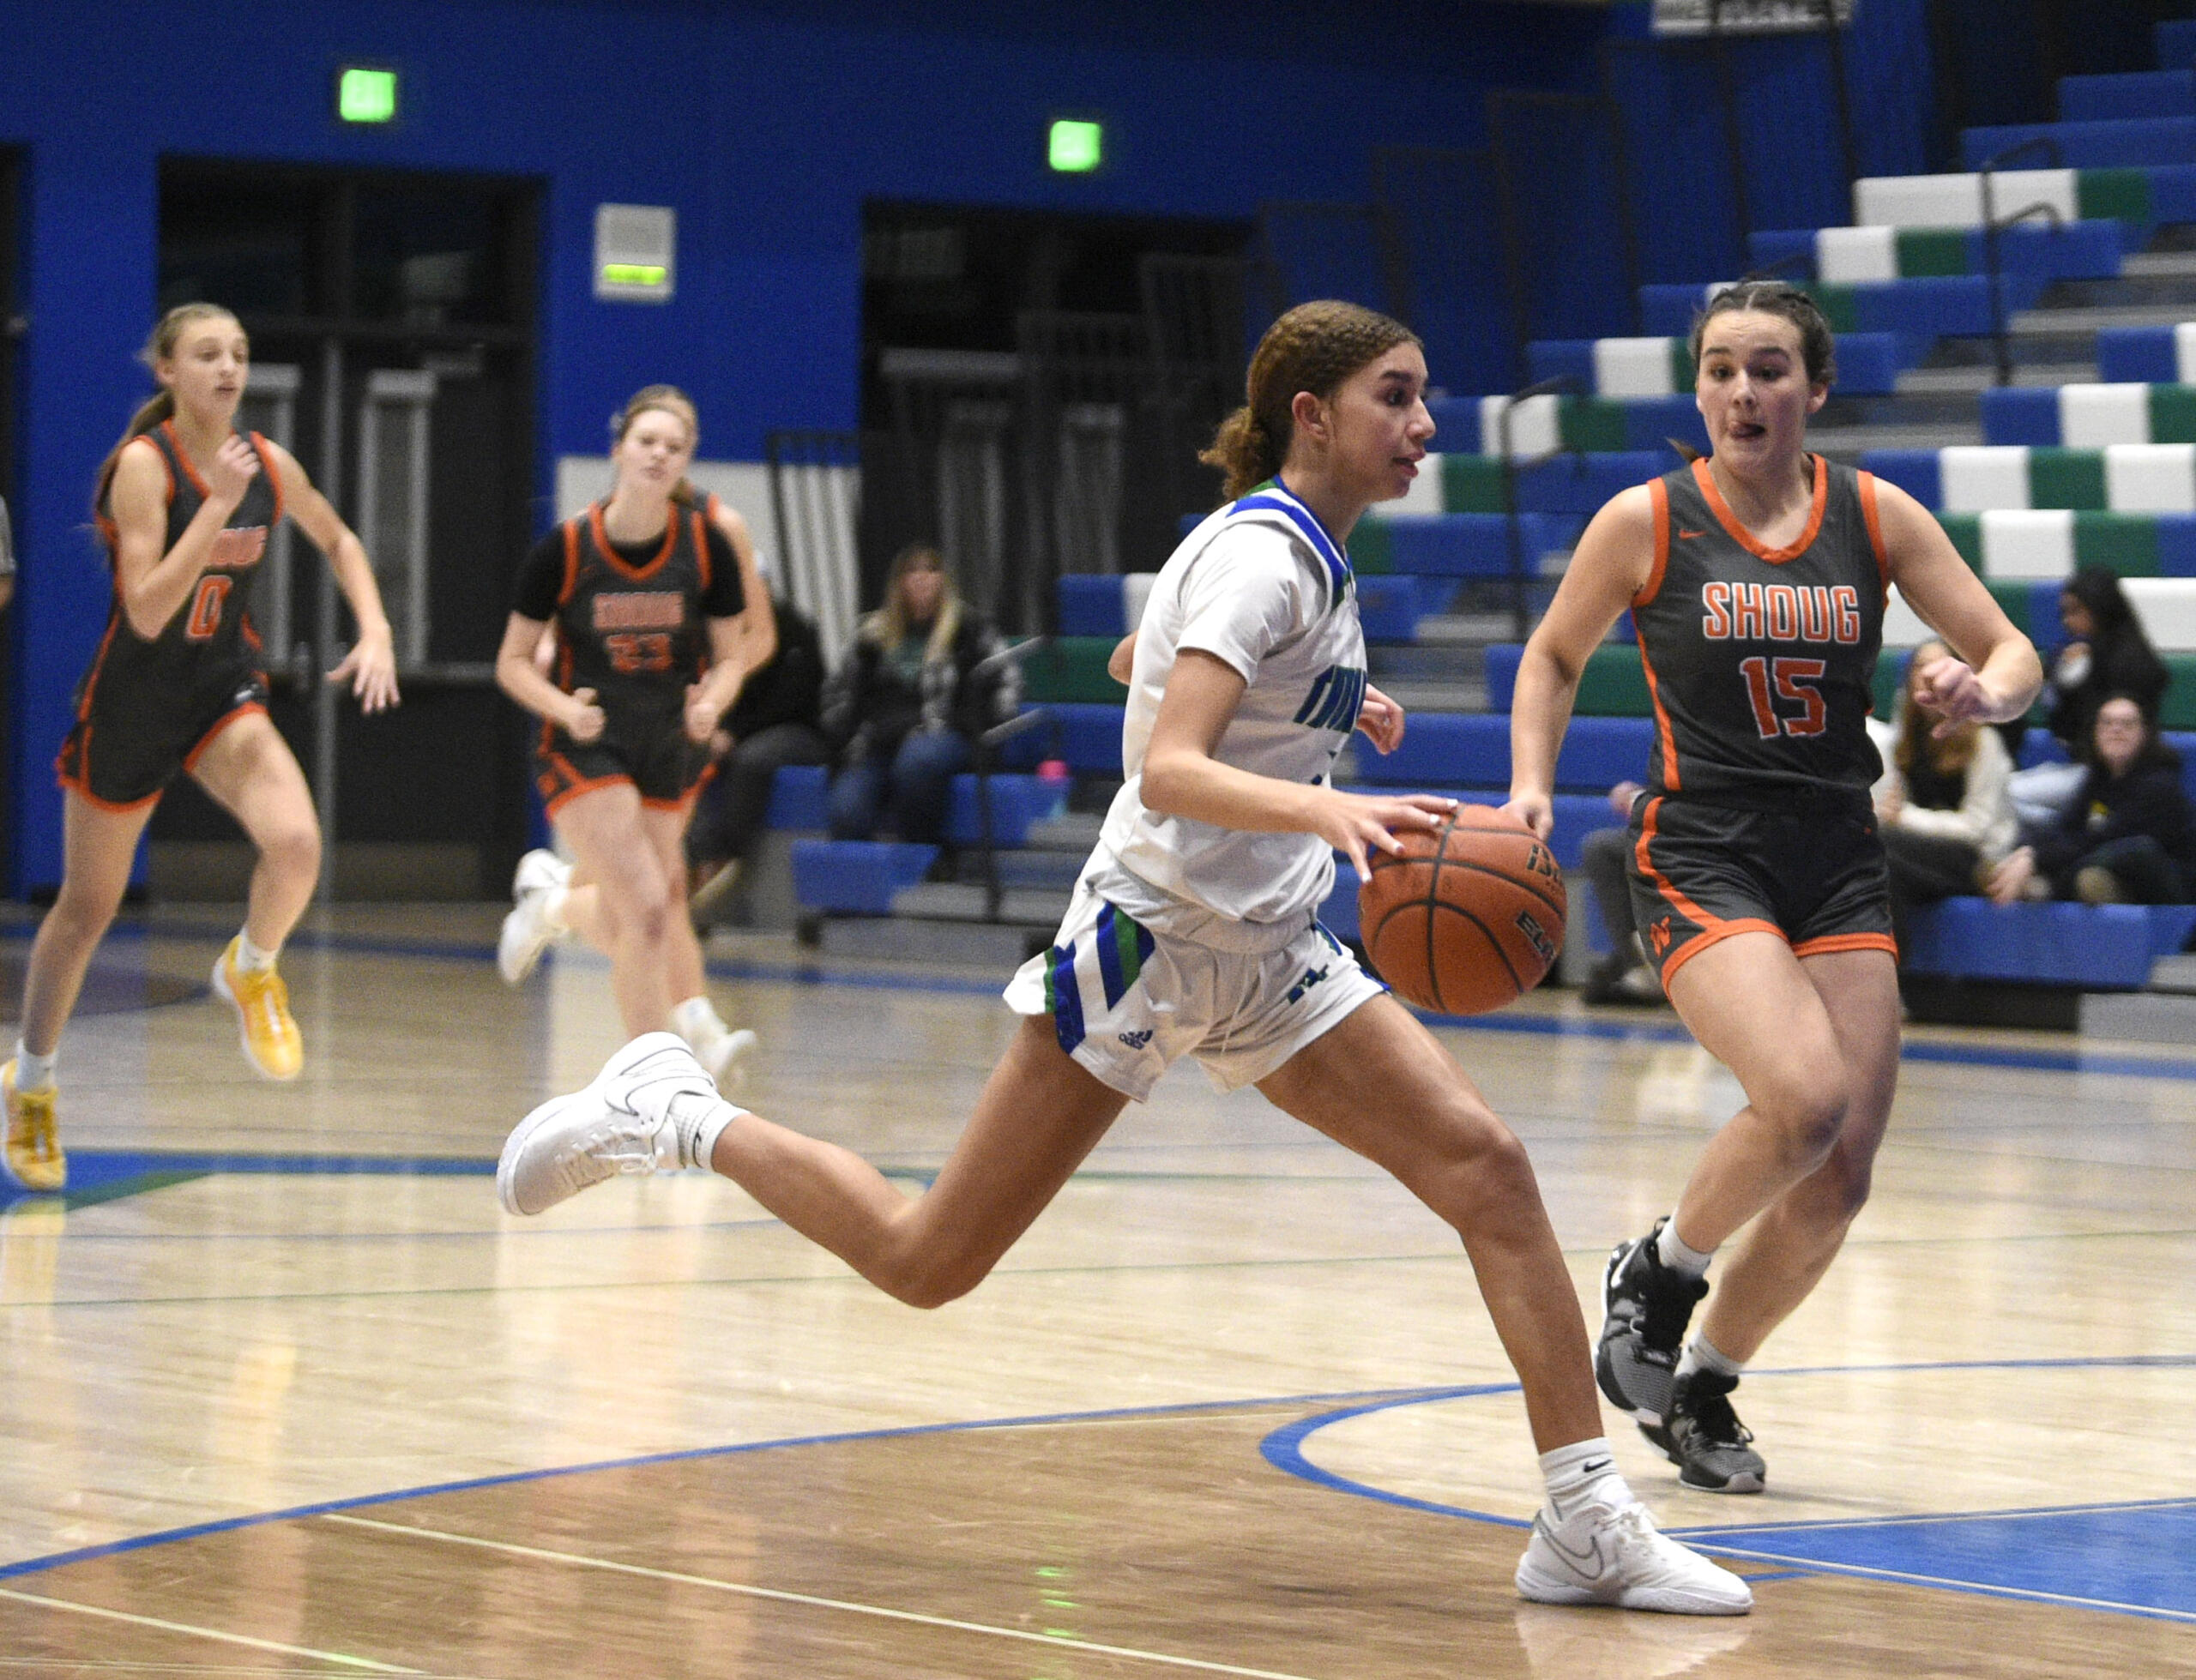 Mountain View’s Jadlyn Senderson dribbles toward the basket on a fastbreak as Washougal’s Jenna Klopman defends during a non-league girls basketball game on Thursday, Nov. 30, 2023, at Mountain View High School.